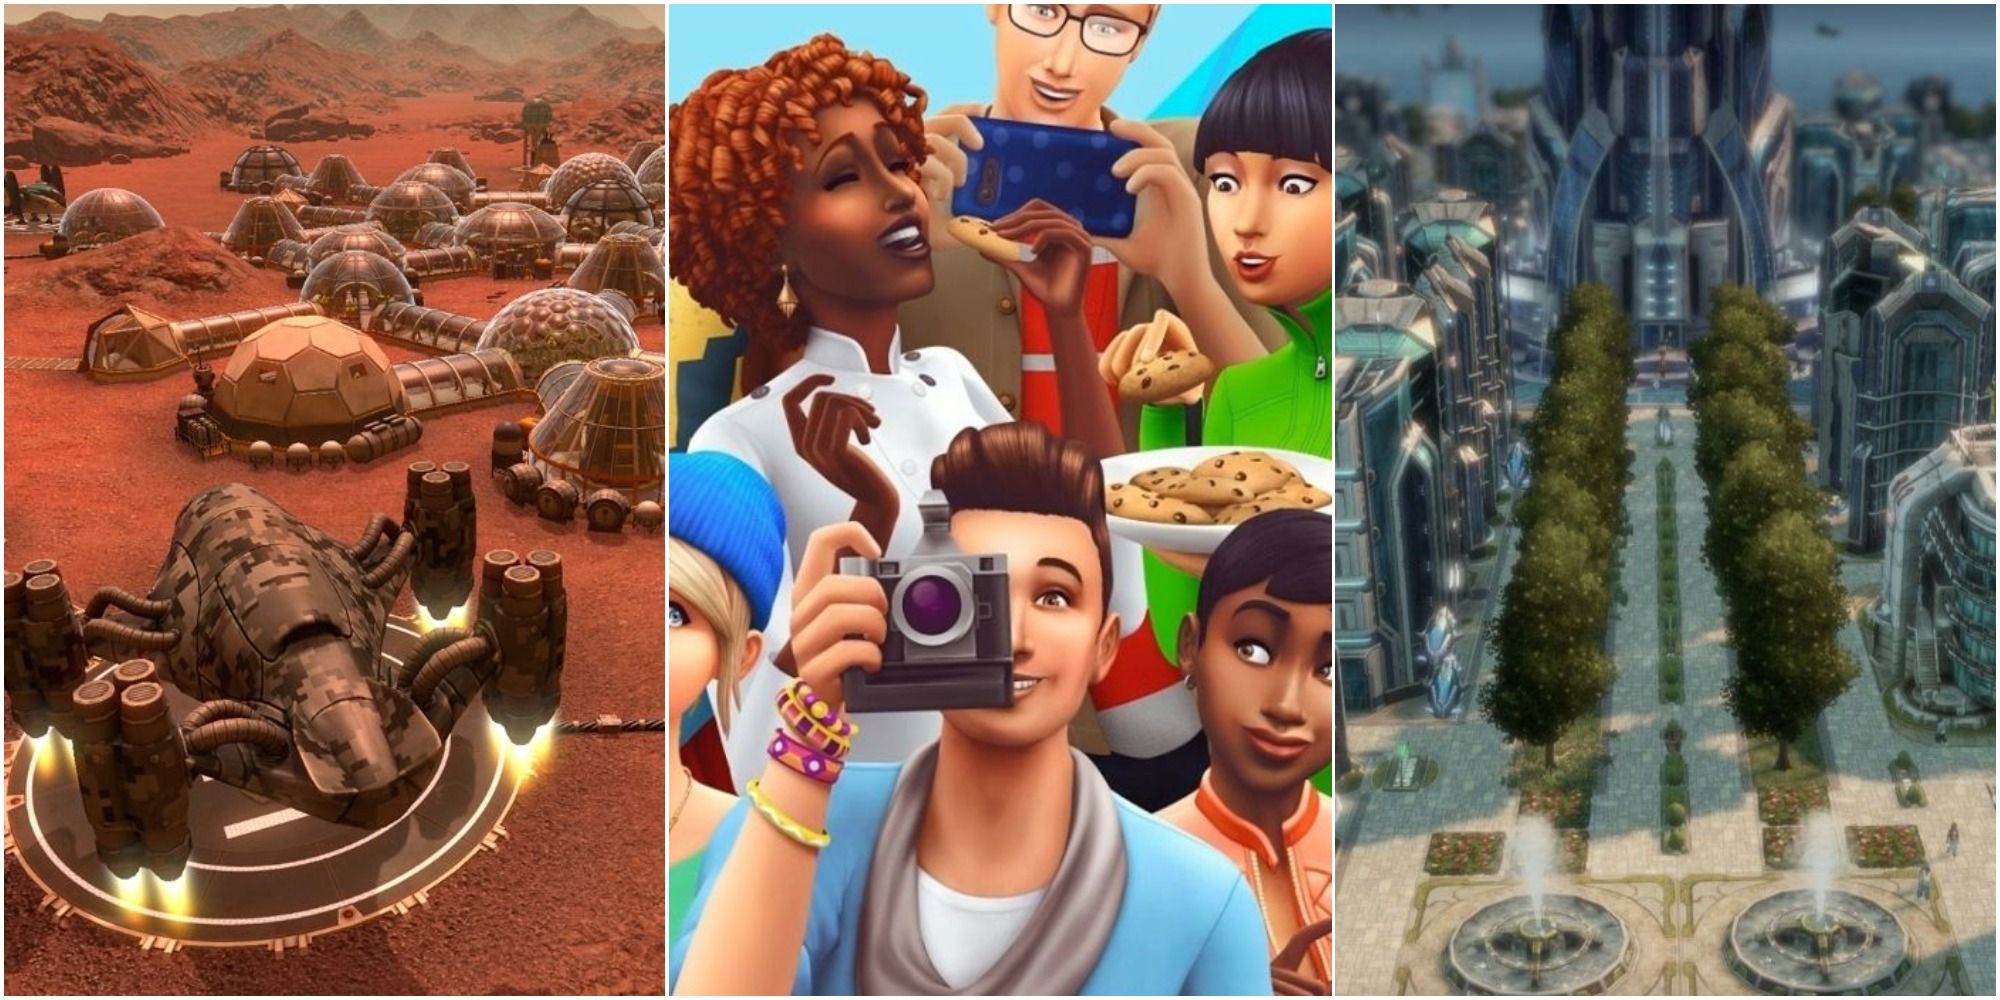 Surviving Mars, Sims 4 Cover art, and Cities Skylines